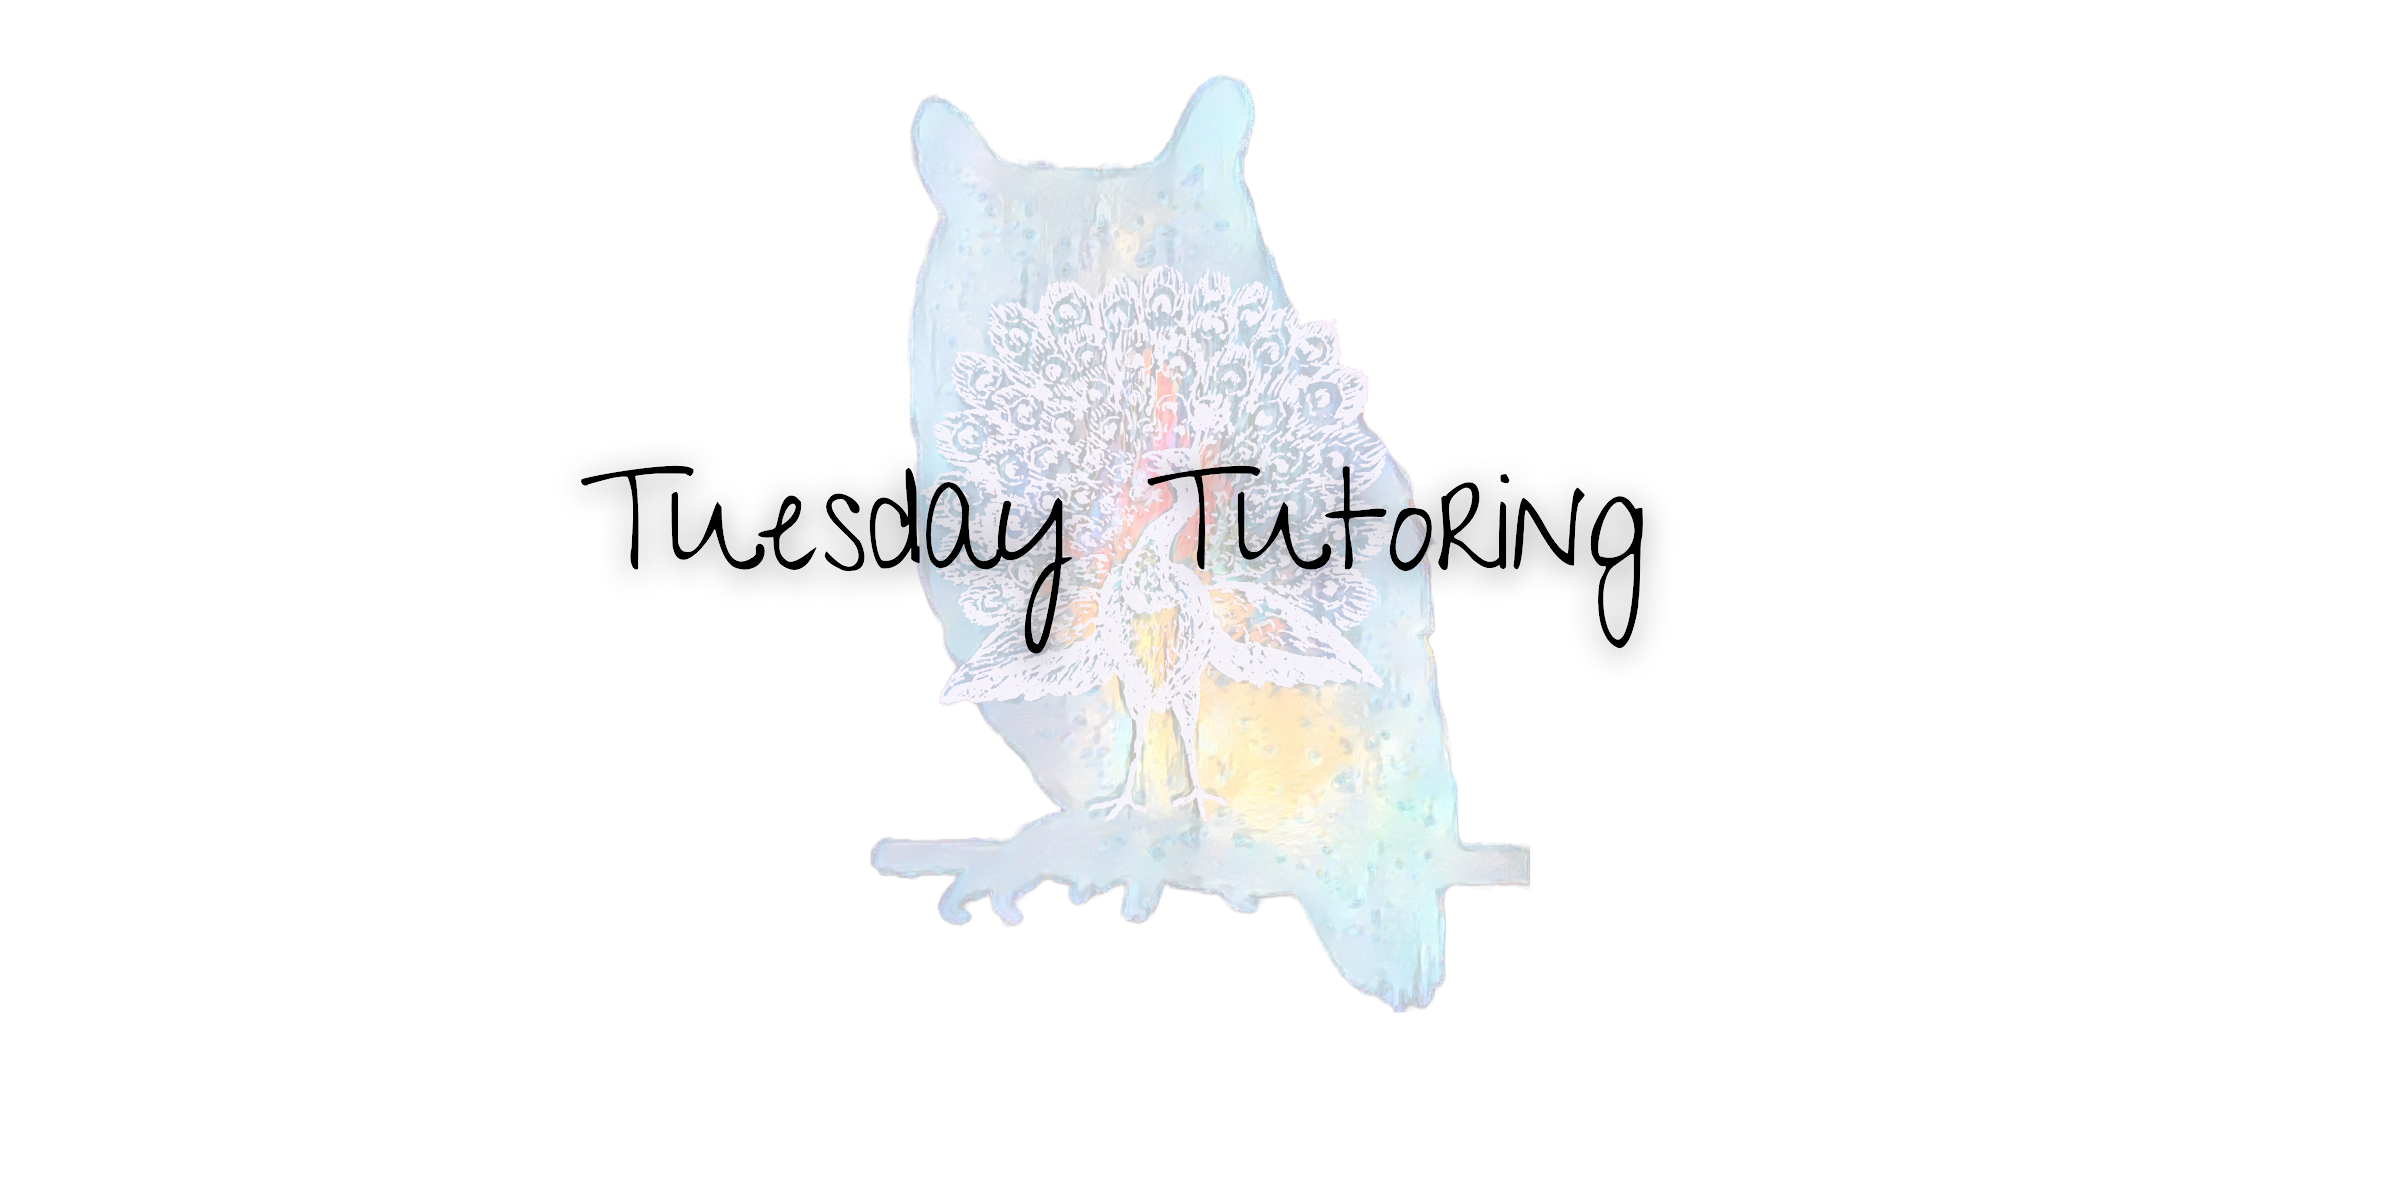 Tuesday Tutoring: The Power of Growth and Learning through Asking for Help